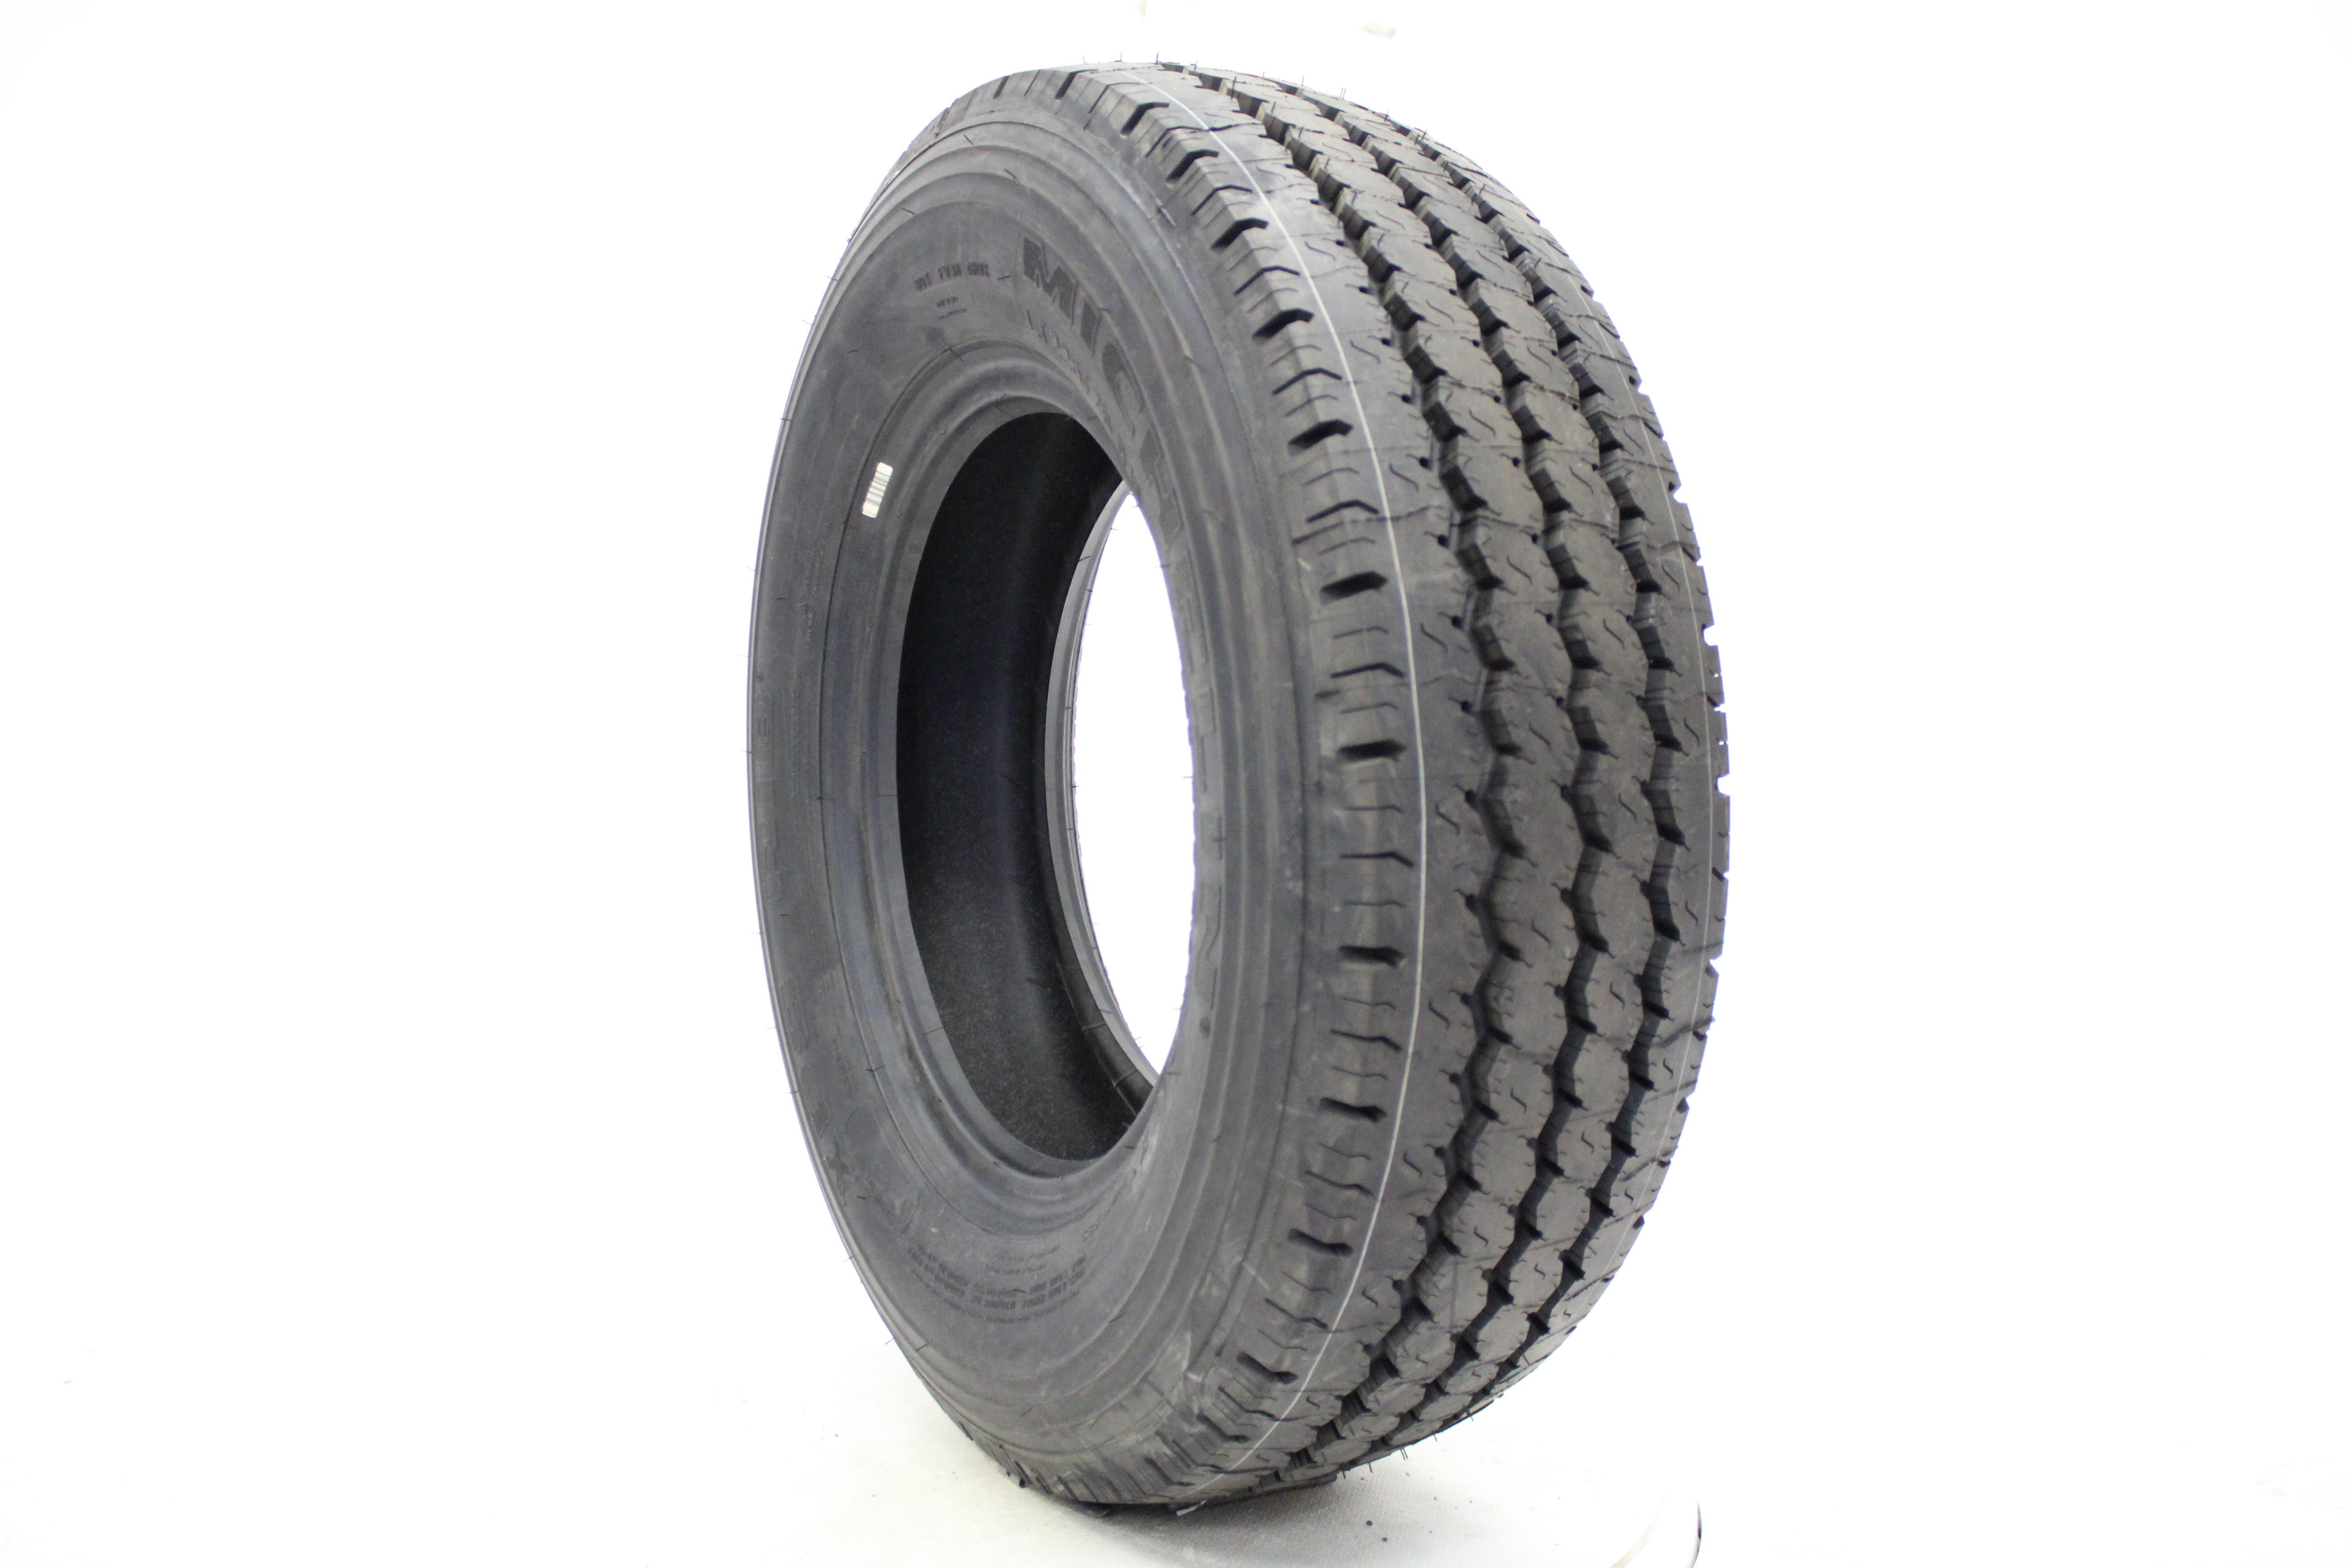 Michelin XPS Truck Radial Traction Radial Tire 215/85R16 115Q 